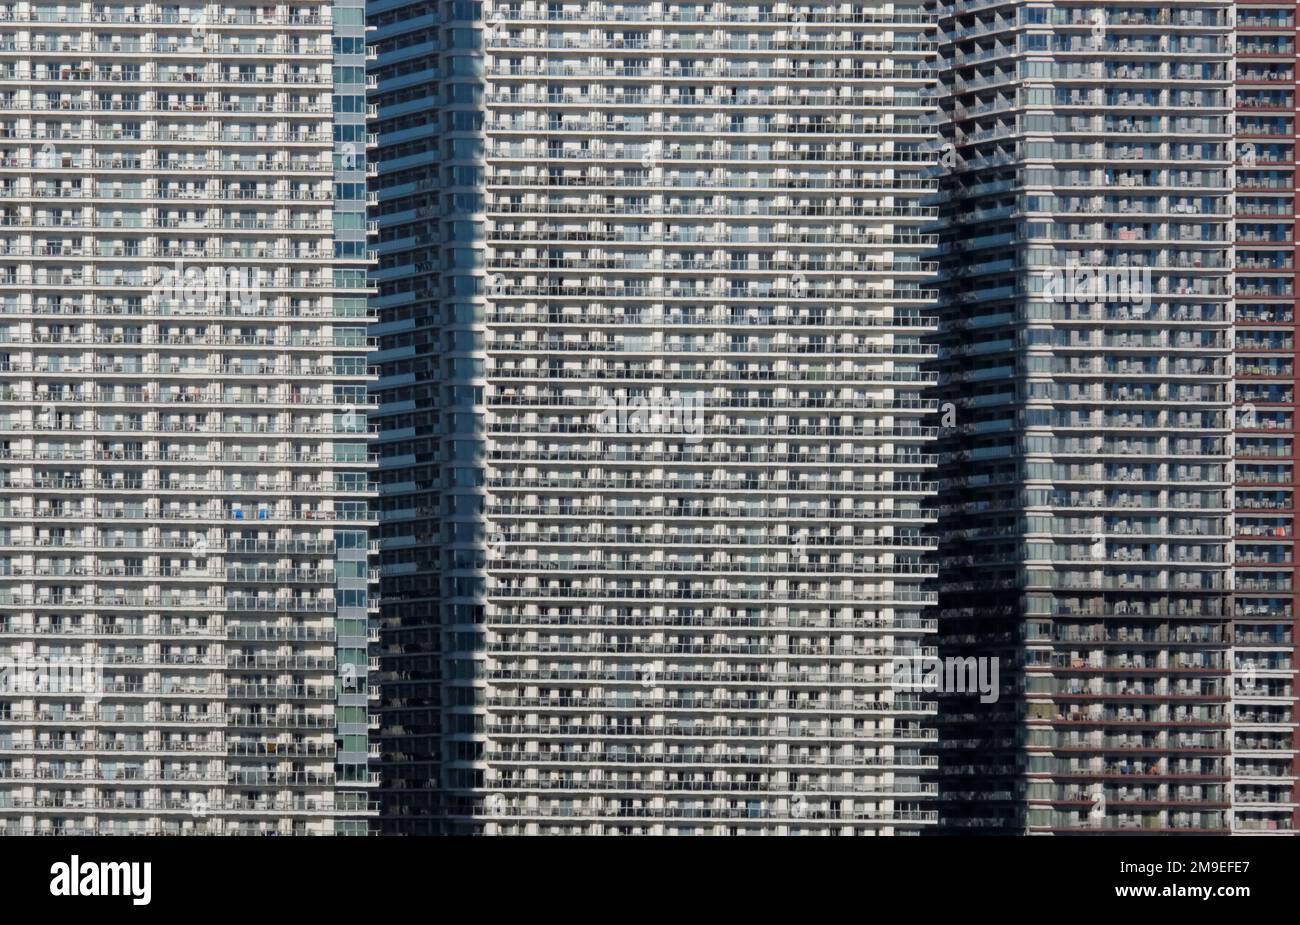 Dense urban living in a row of skyscrapers in Tokyo, Japan Stock Photo